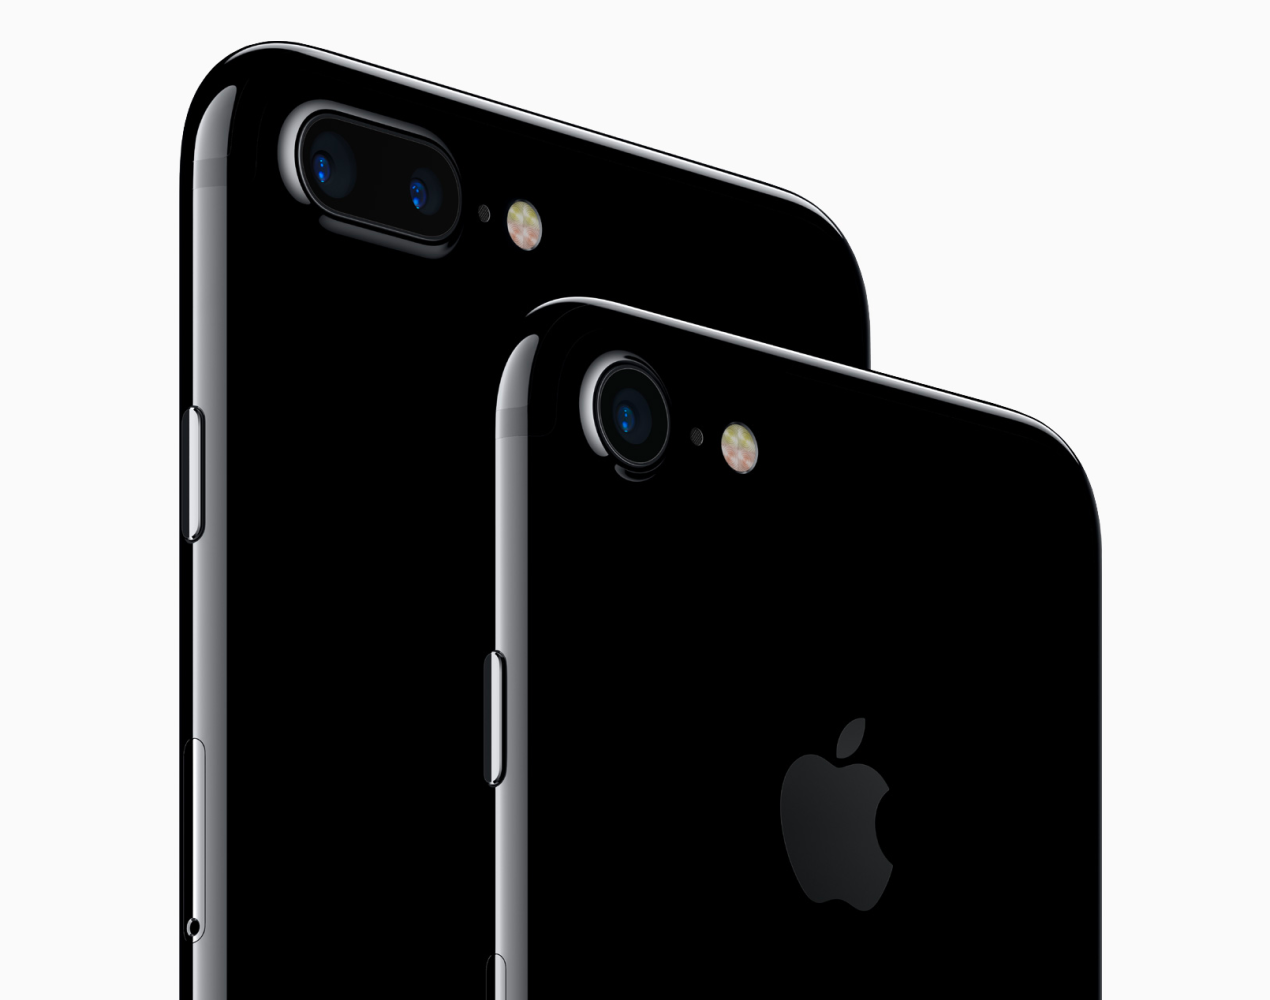 Apple might announce 3 different iPhone 7 models this year